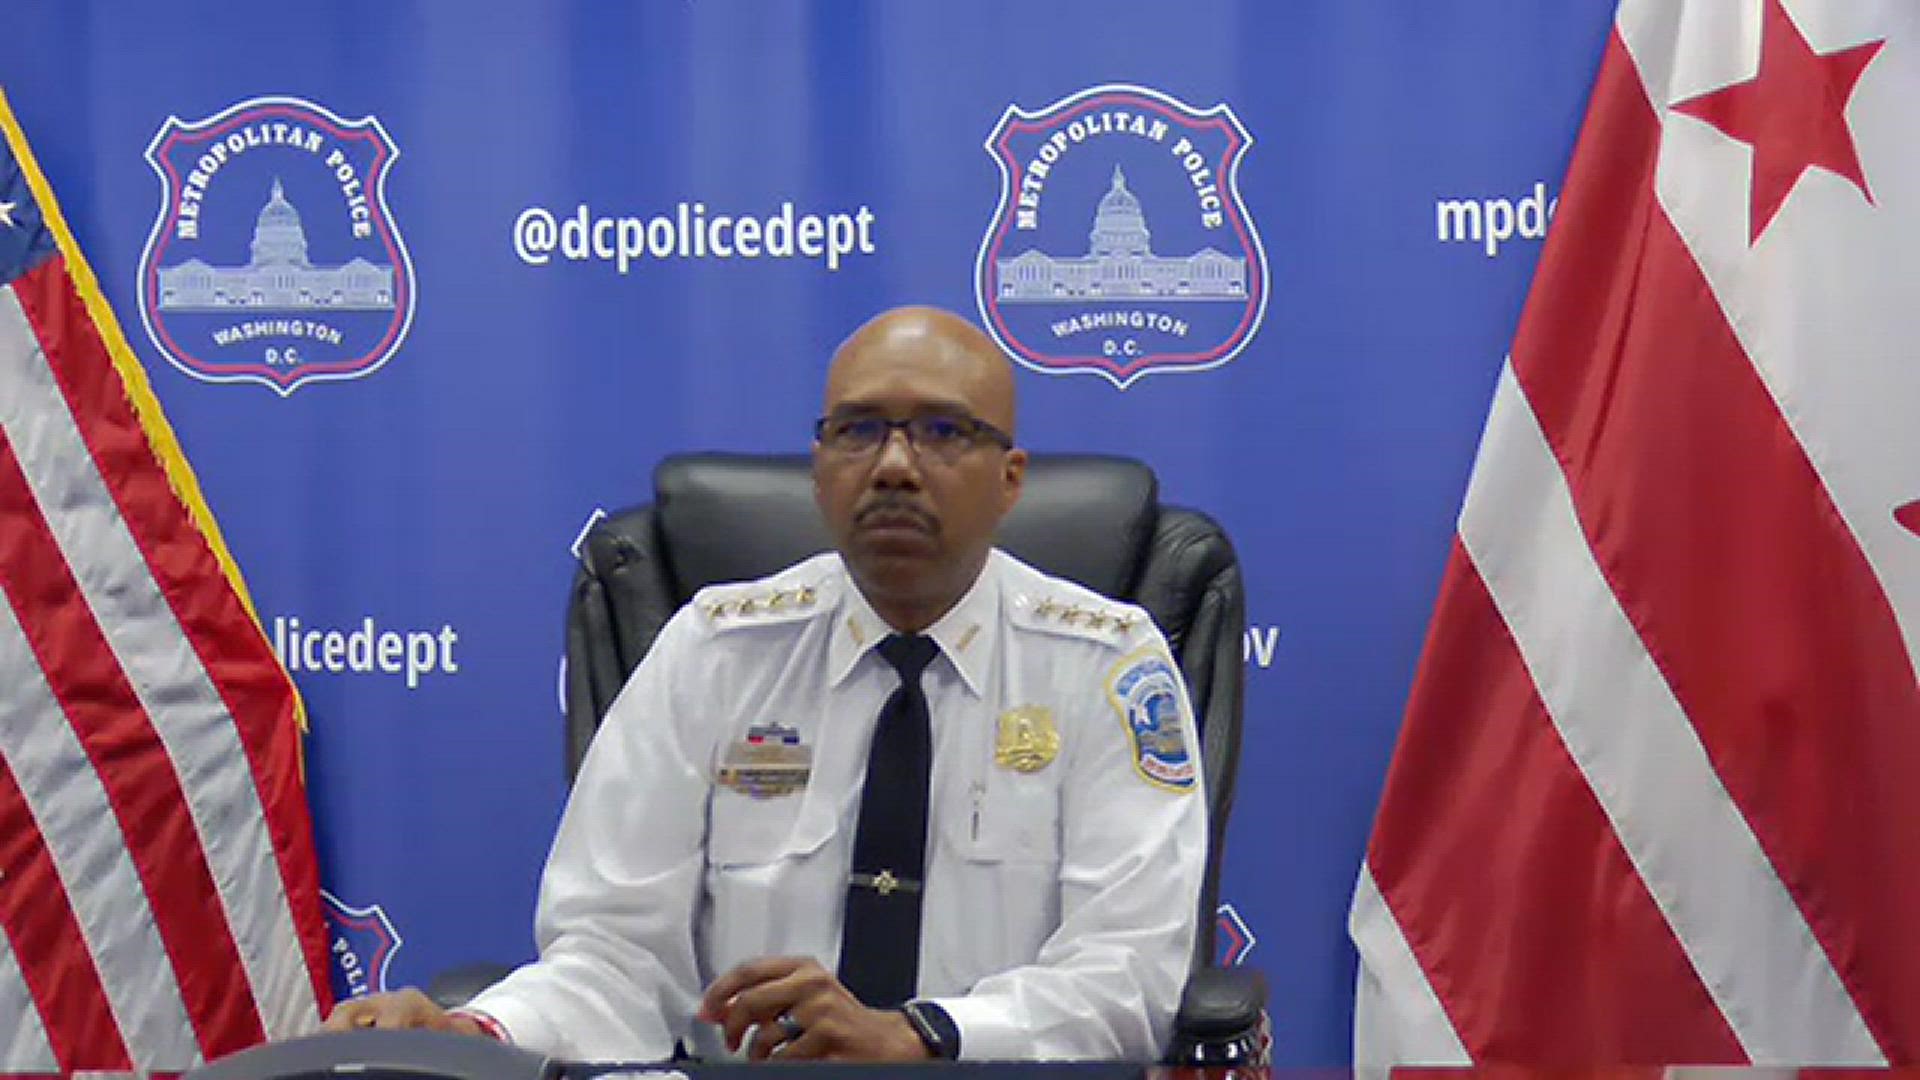 Contee speaks on the quadruple shooting, the fatal shooting of a woman dressed as a Special Police officer, and gun violence in general in the District.